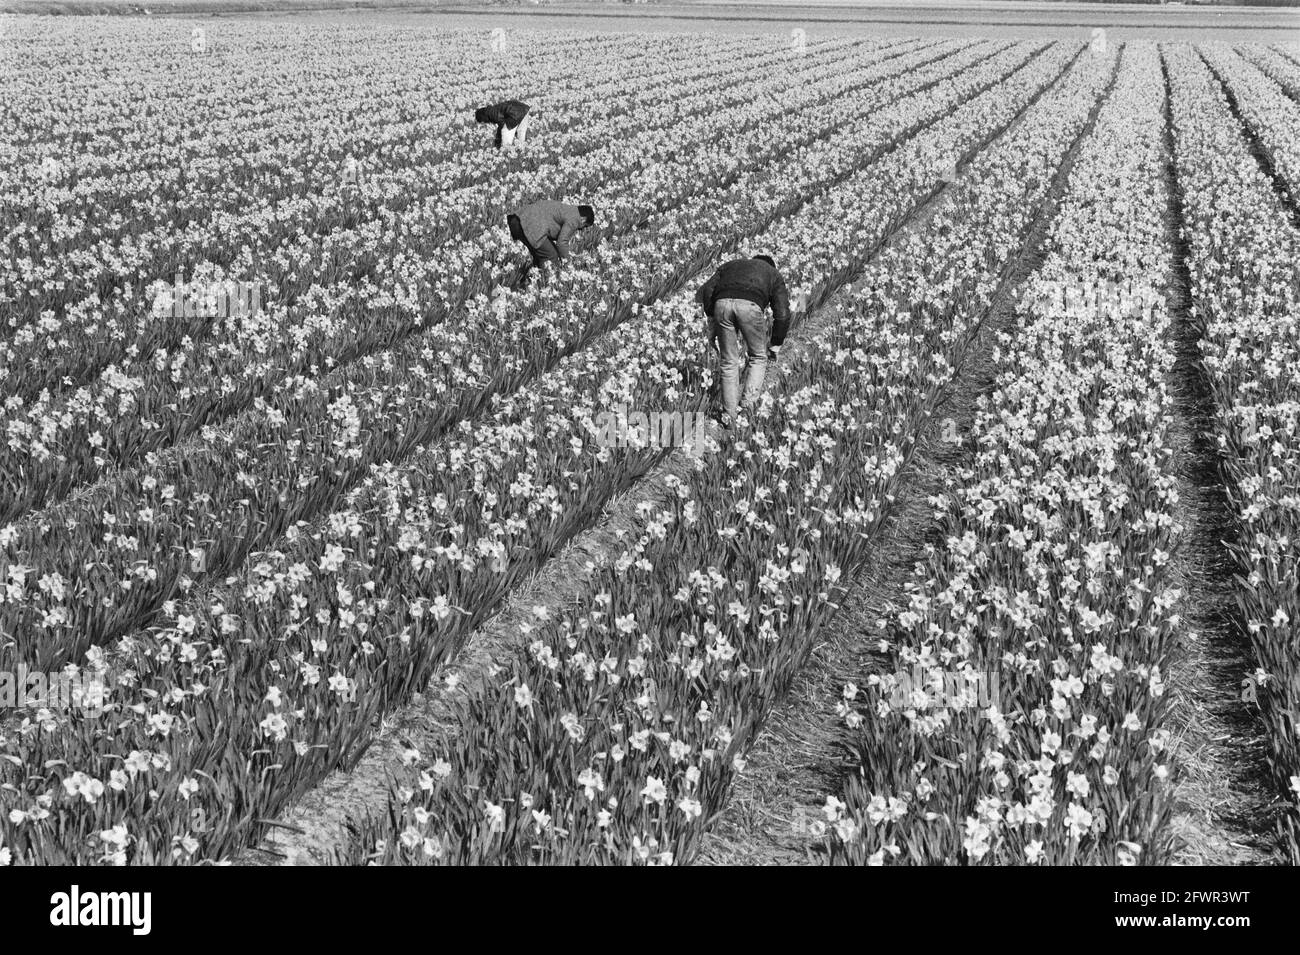 Daffodil fields near Hillegom, March 6, 1989, flowers, bulb region, fields, The Netherlands, 20th century press agency photo, news to remember, documentary, historic photography 1945-1990, visual stories, human history of the Twentieth Century, capturing moments in time Stock Photo